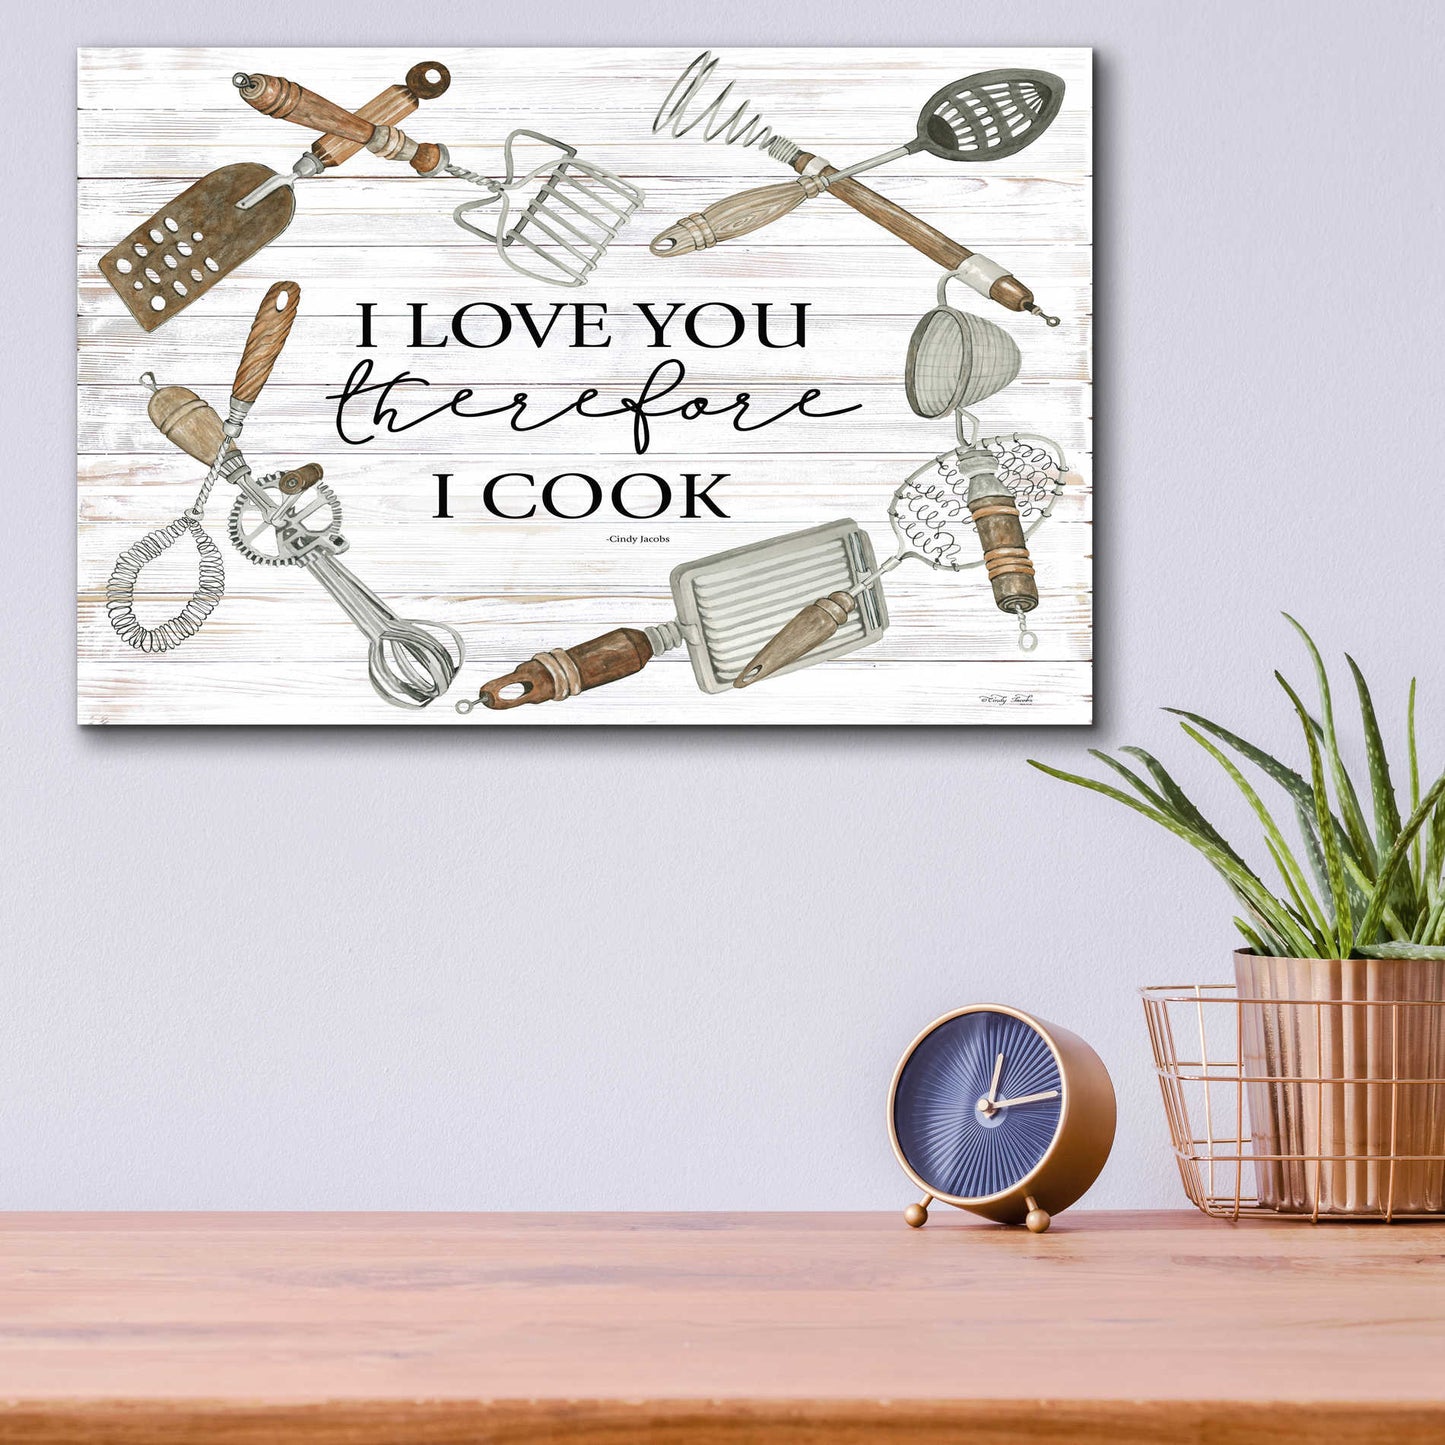 Epic Art 'I Love You Therefore I Cook' by Cindy Jacobs, Acrylic Glass Wall Art,16x12